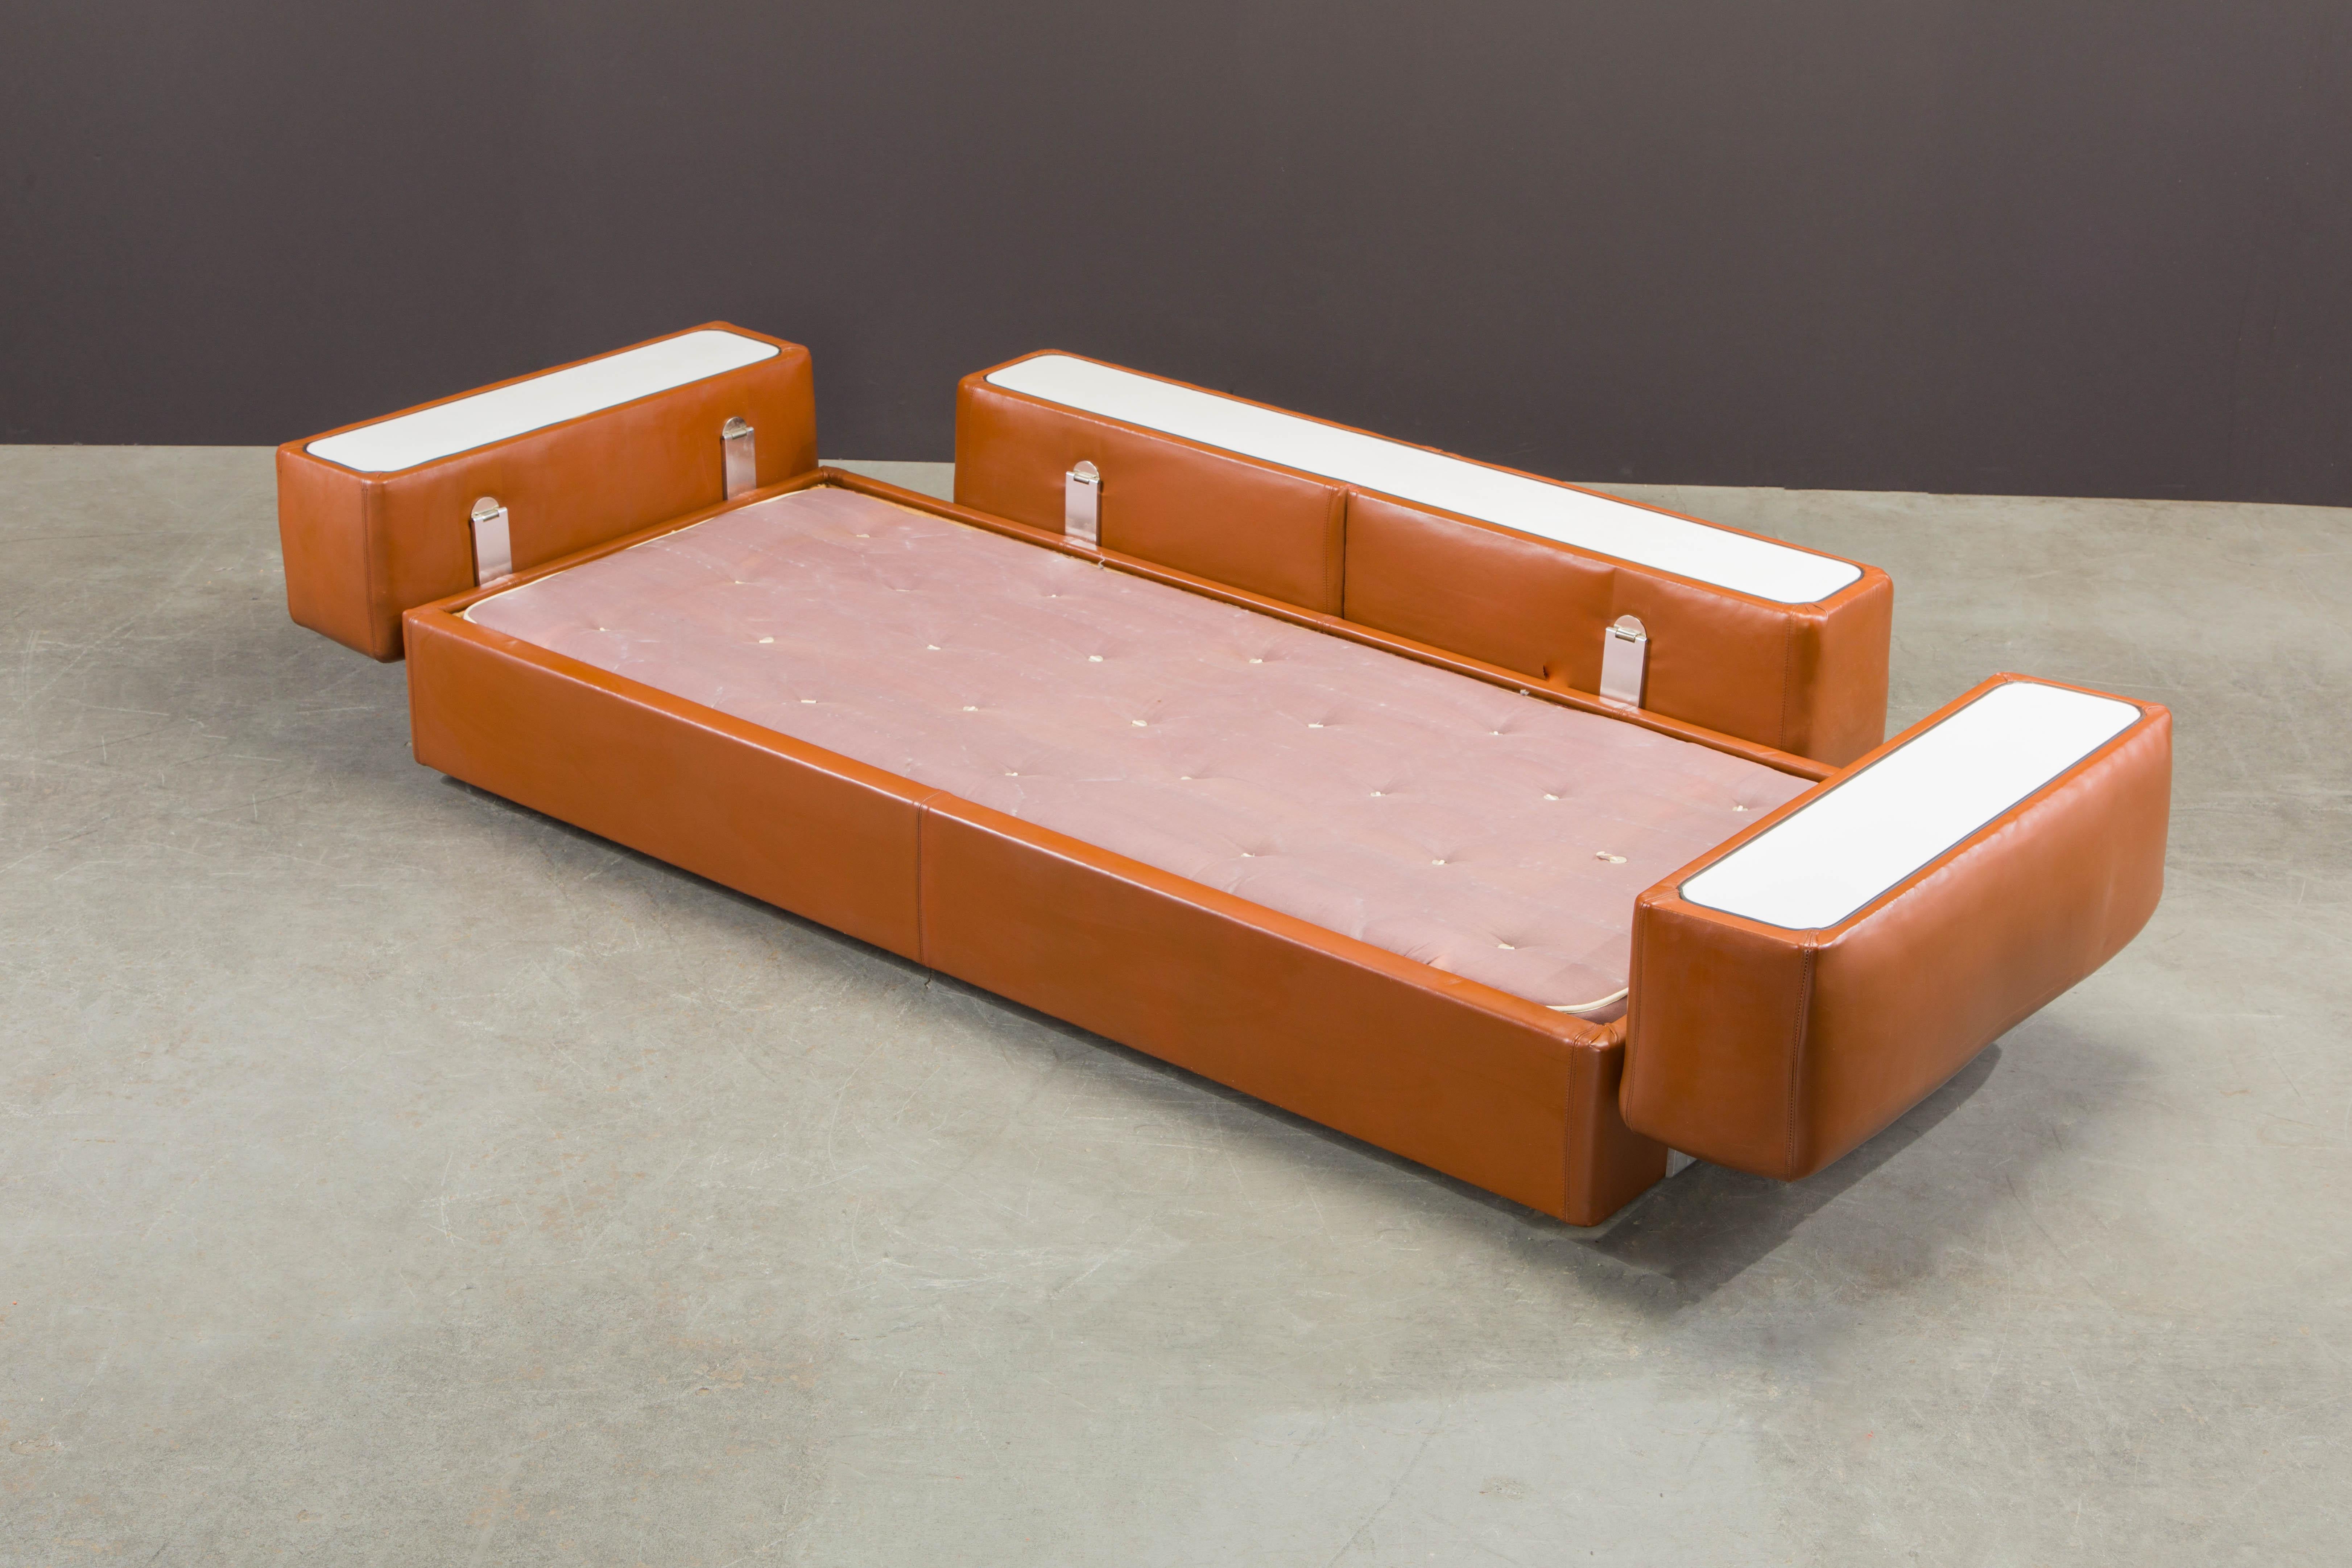 Mid-20th Century Pair of Tito Agnoli Leather Convertible Sofas for Cinova, 1960s Italy, Signed